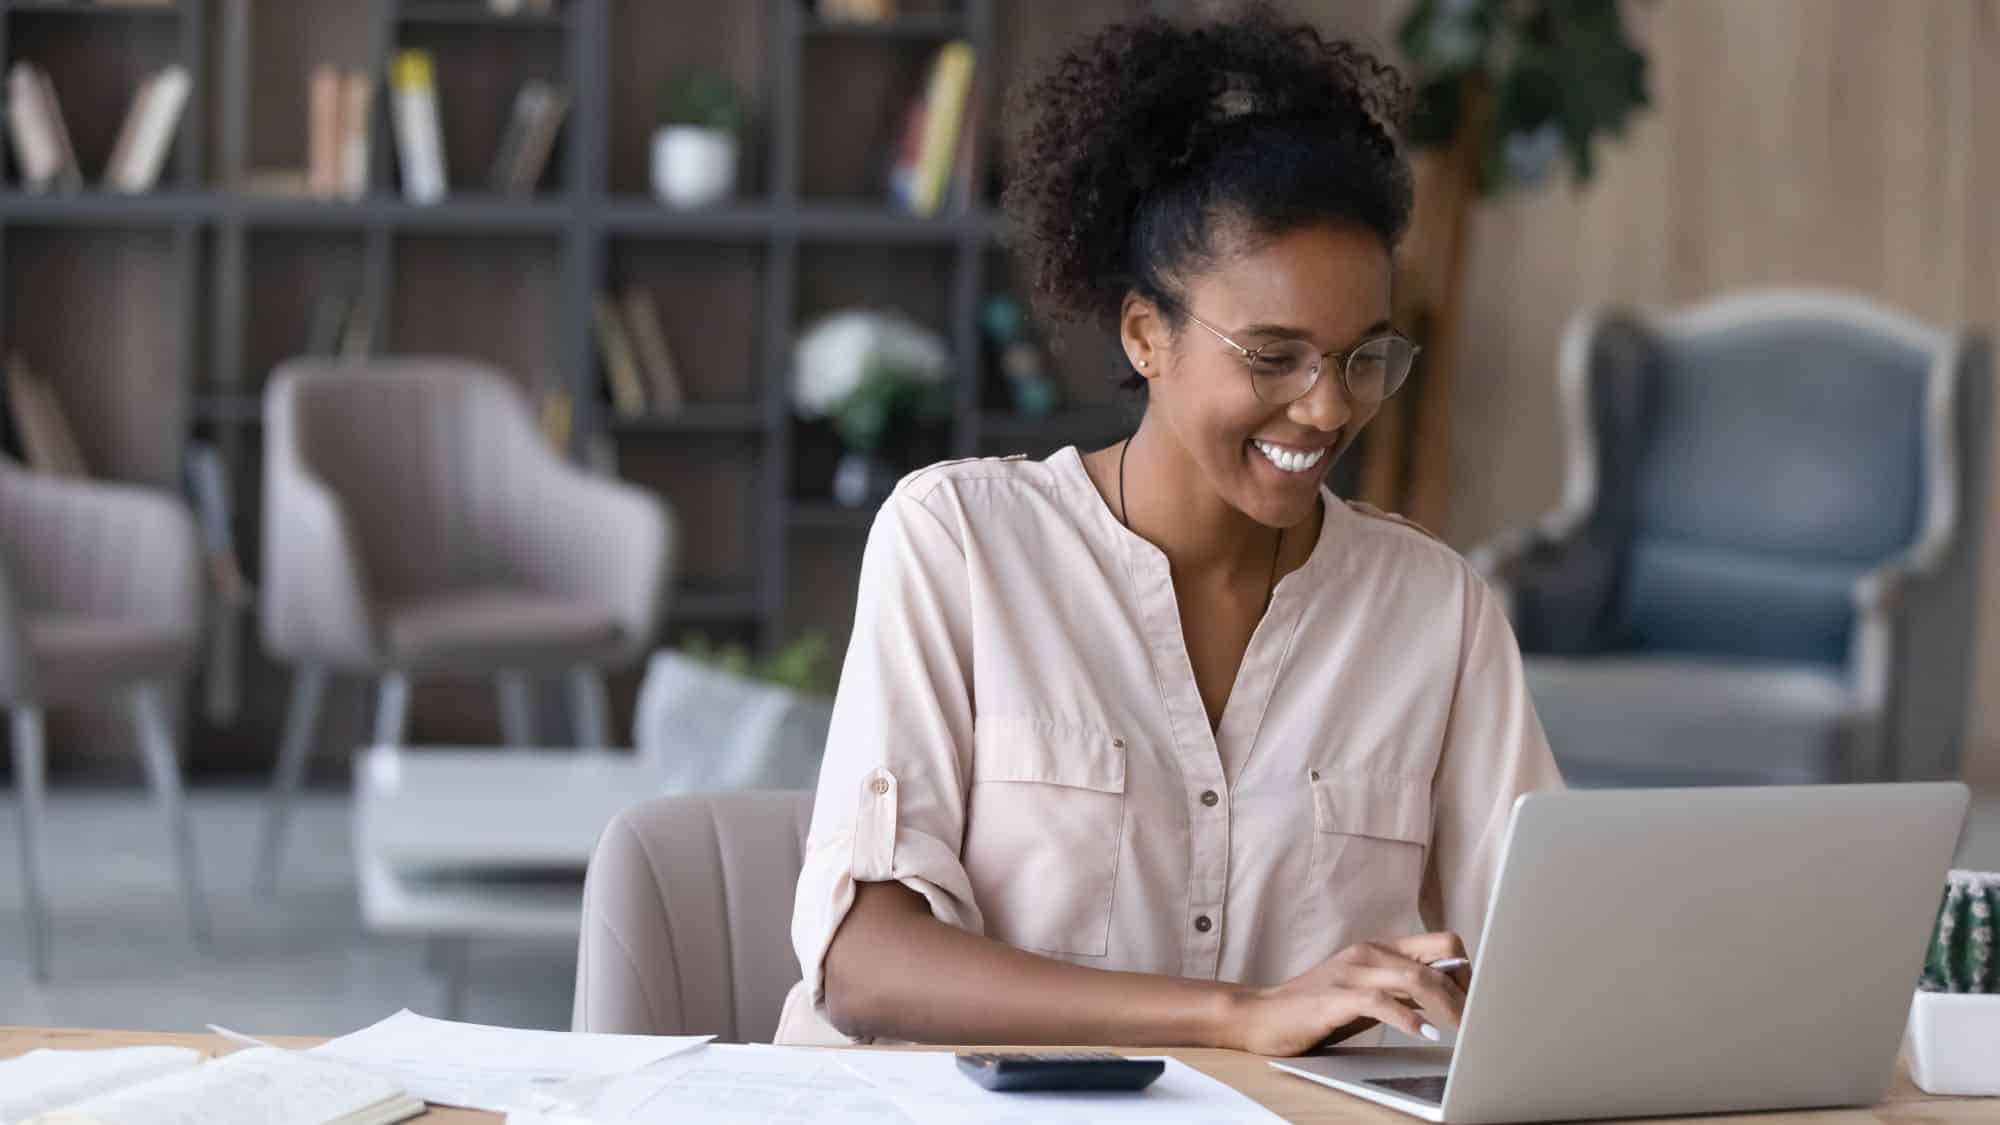 Woman working on computer smiling